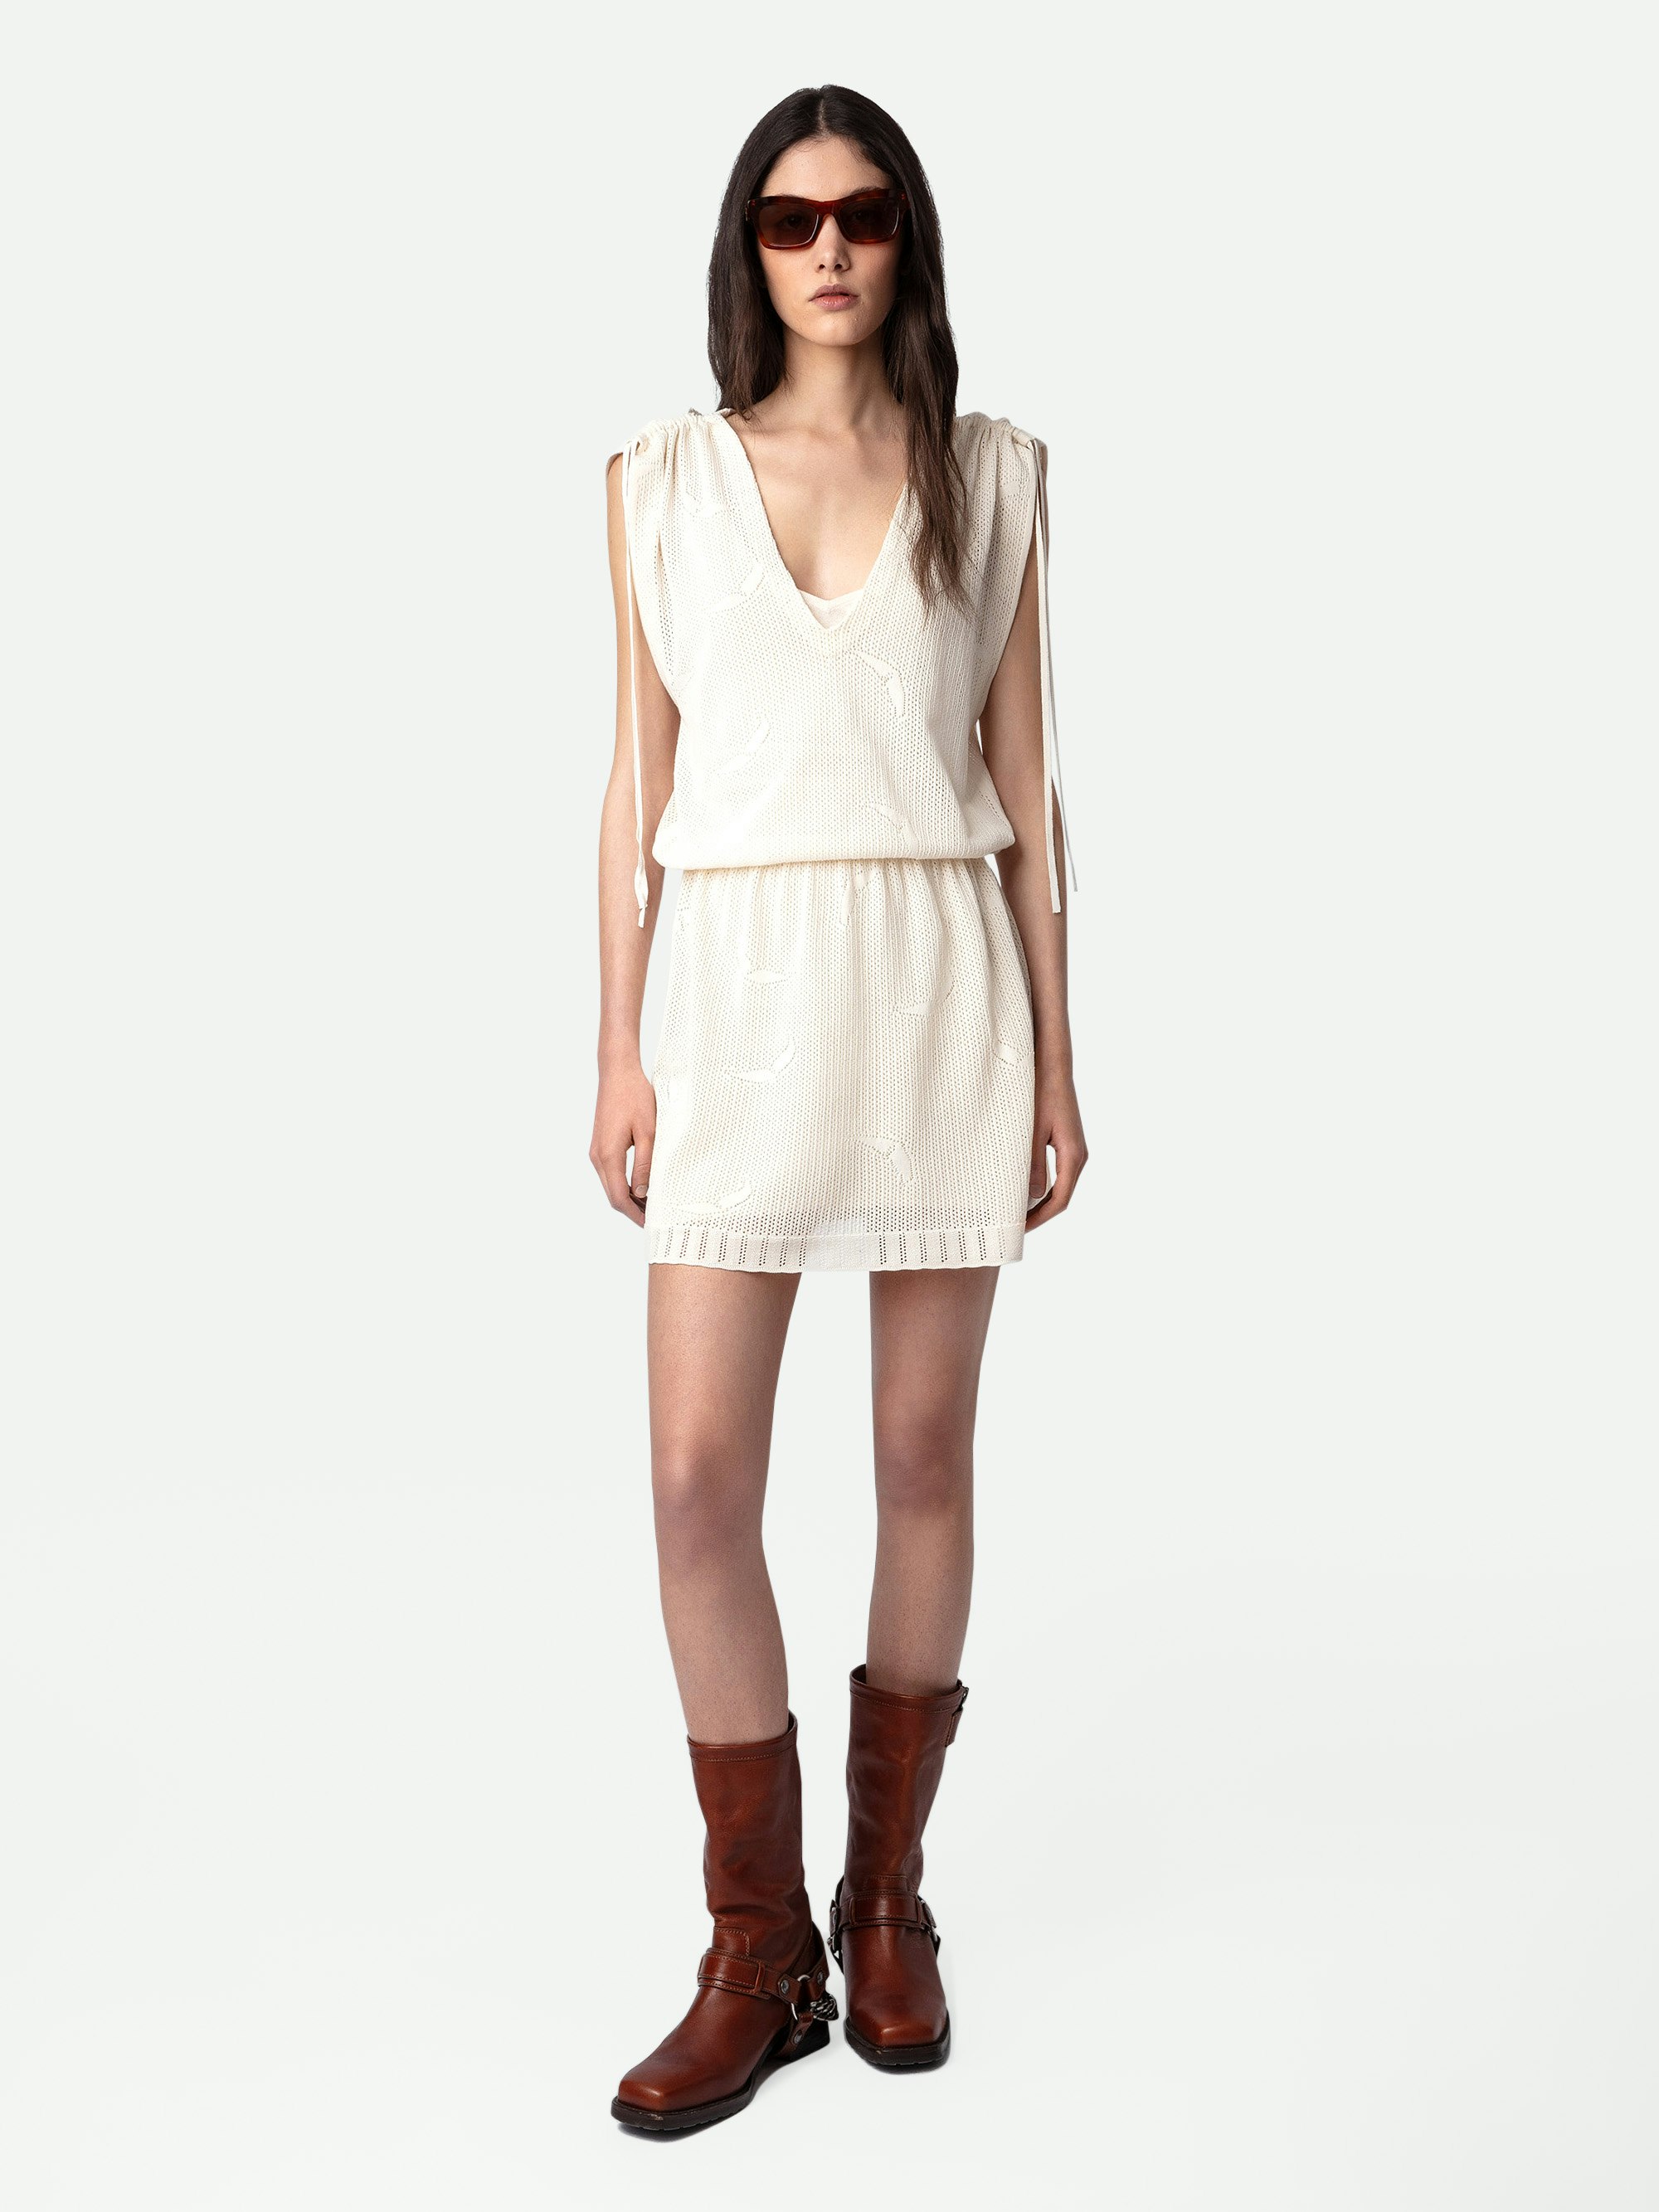 Alanis Dress - Ecru lace cotton mini dress with elasticated waistband and short sleeves with ties.